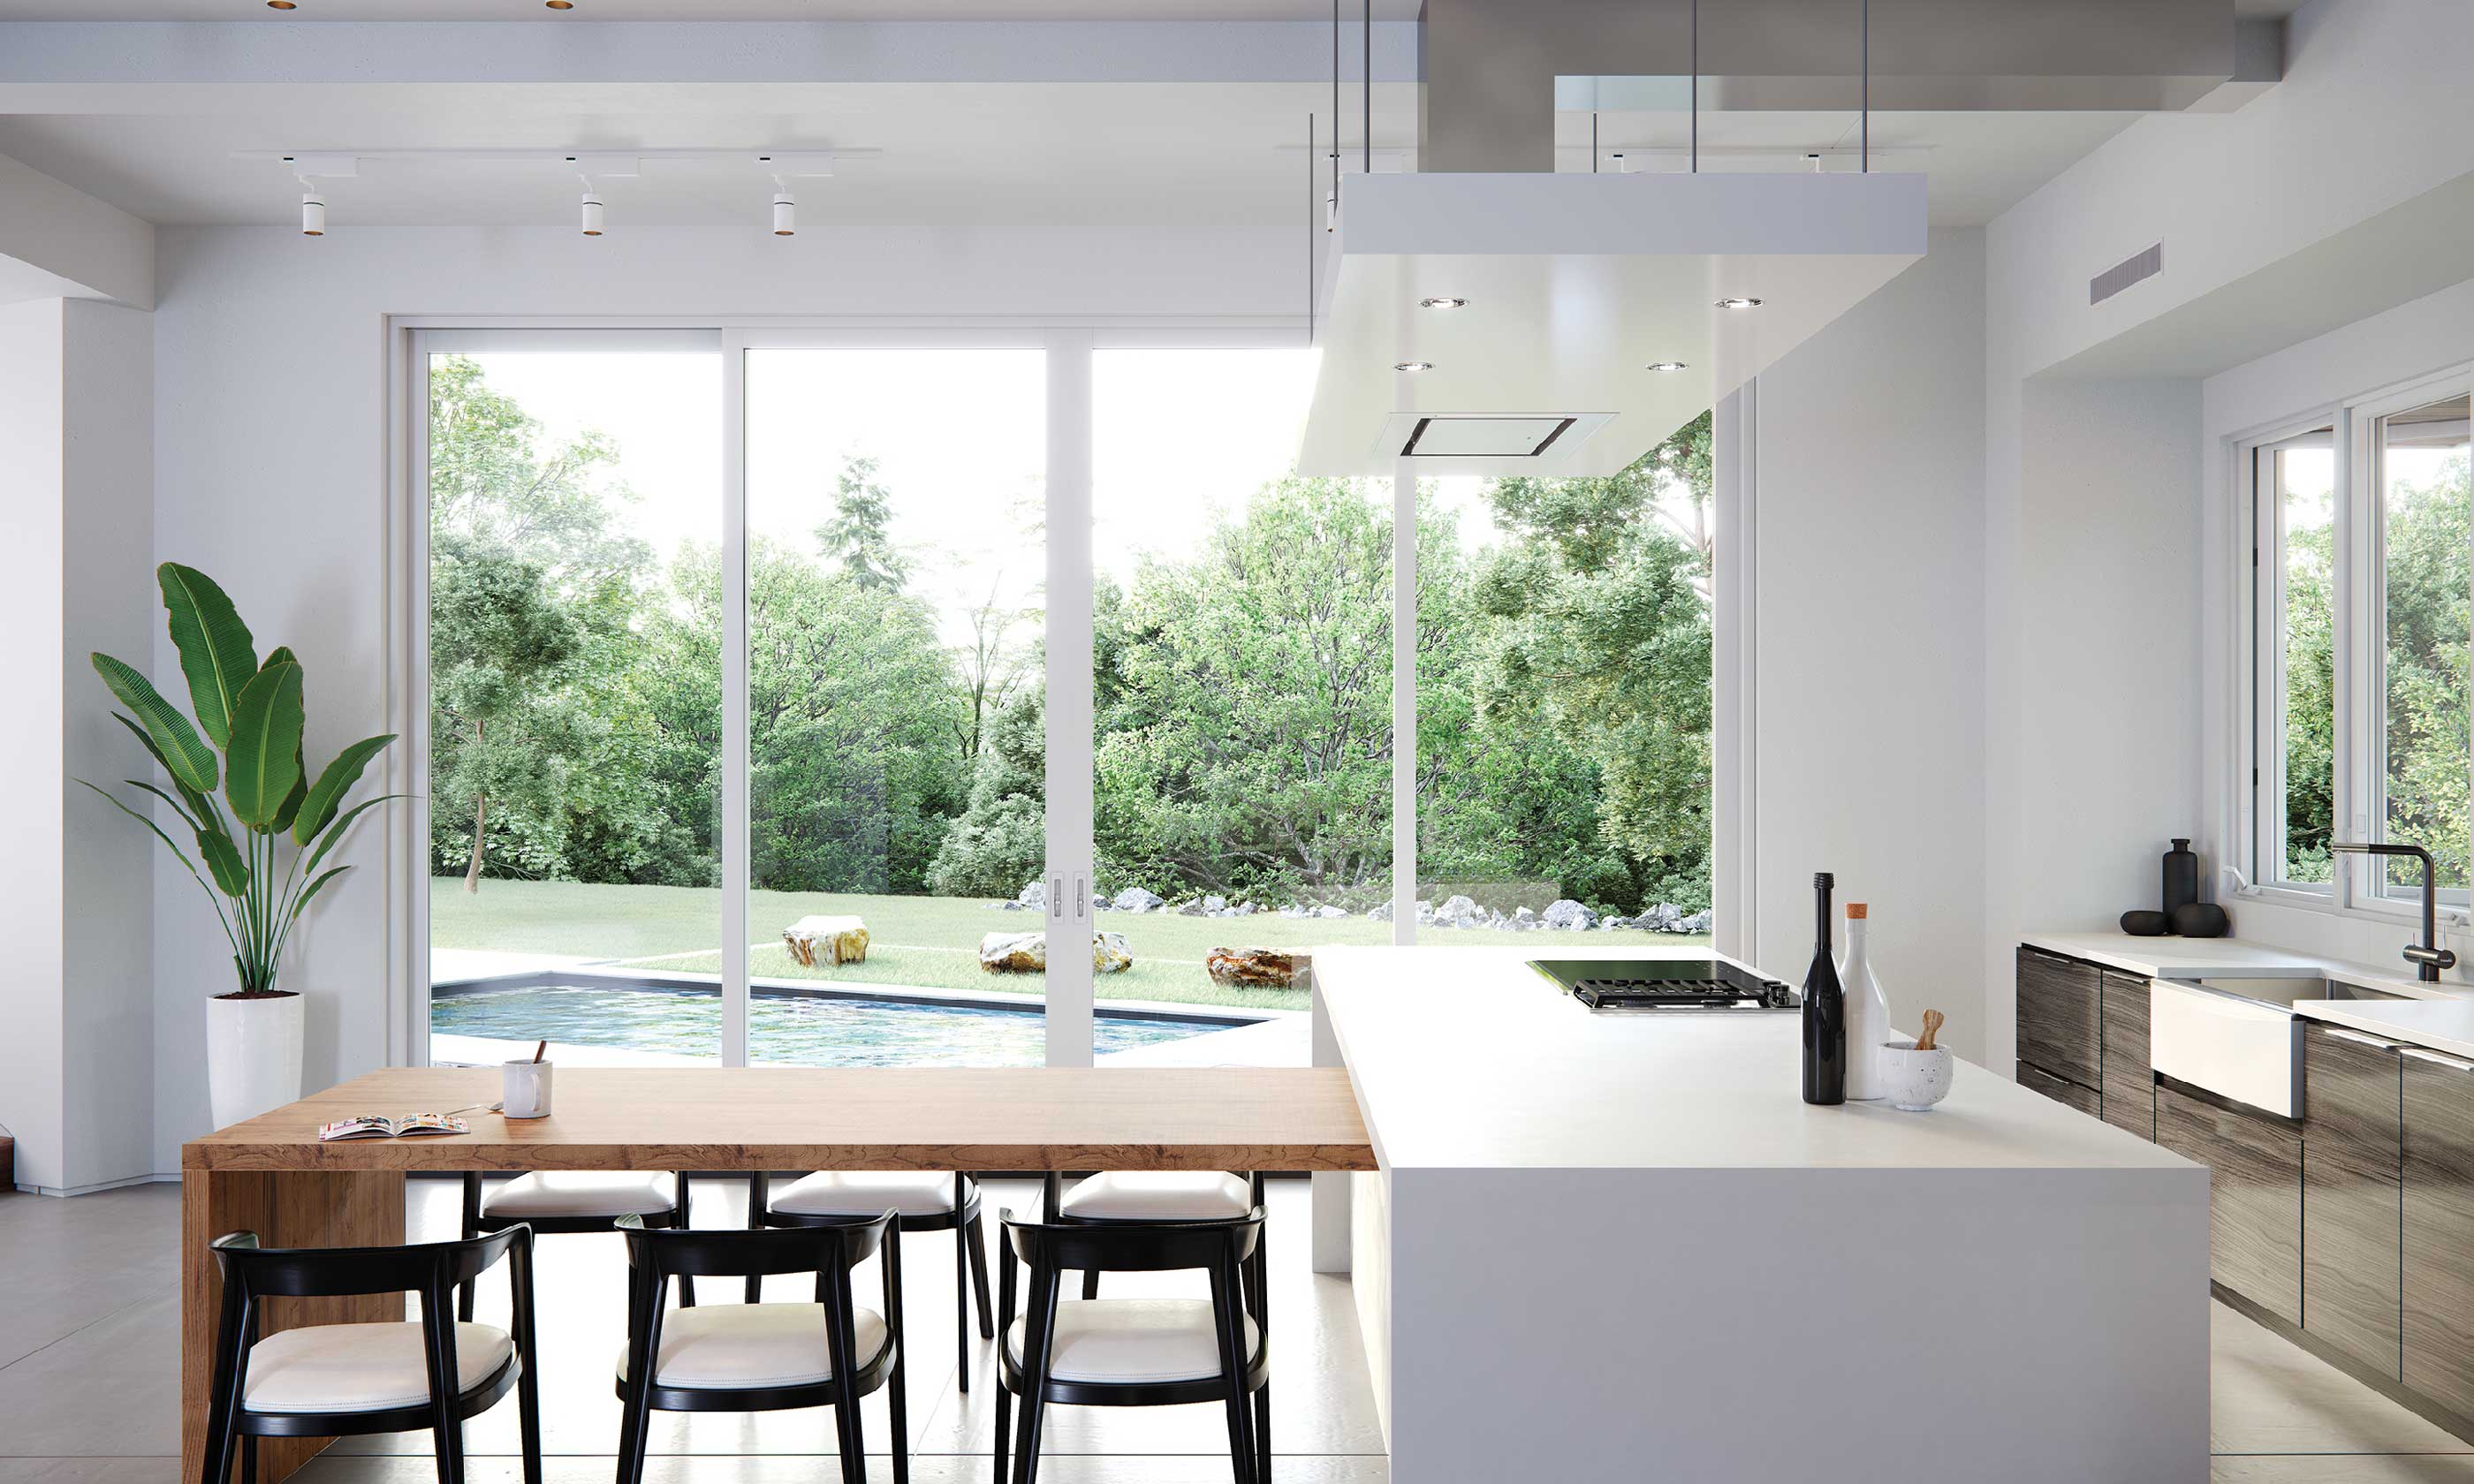 Kitchen with floor to ceiling windows overlooking a pool